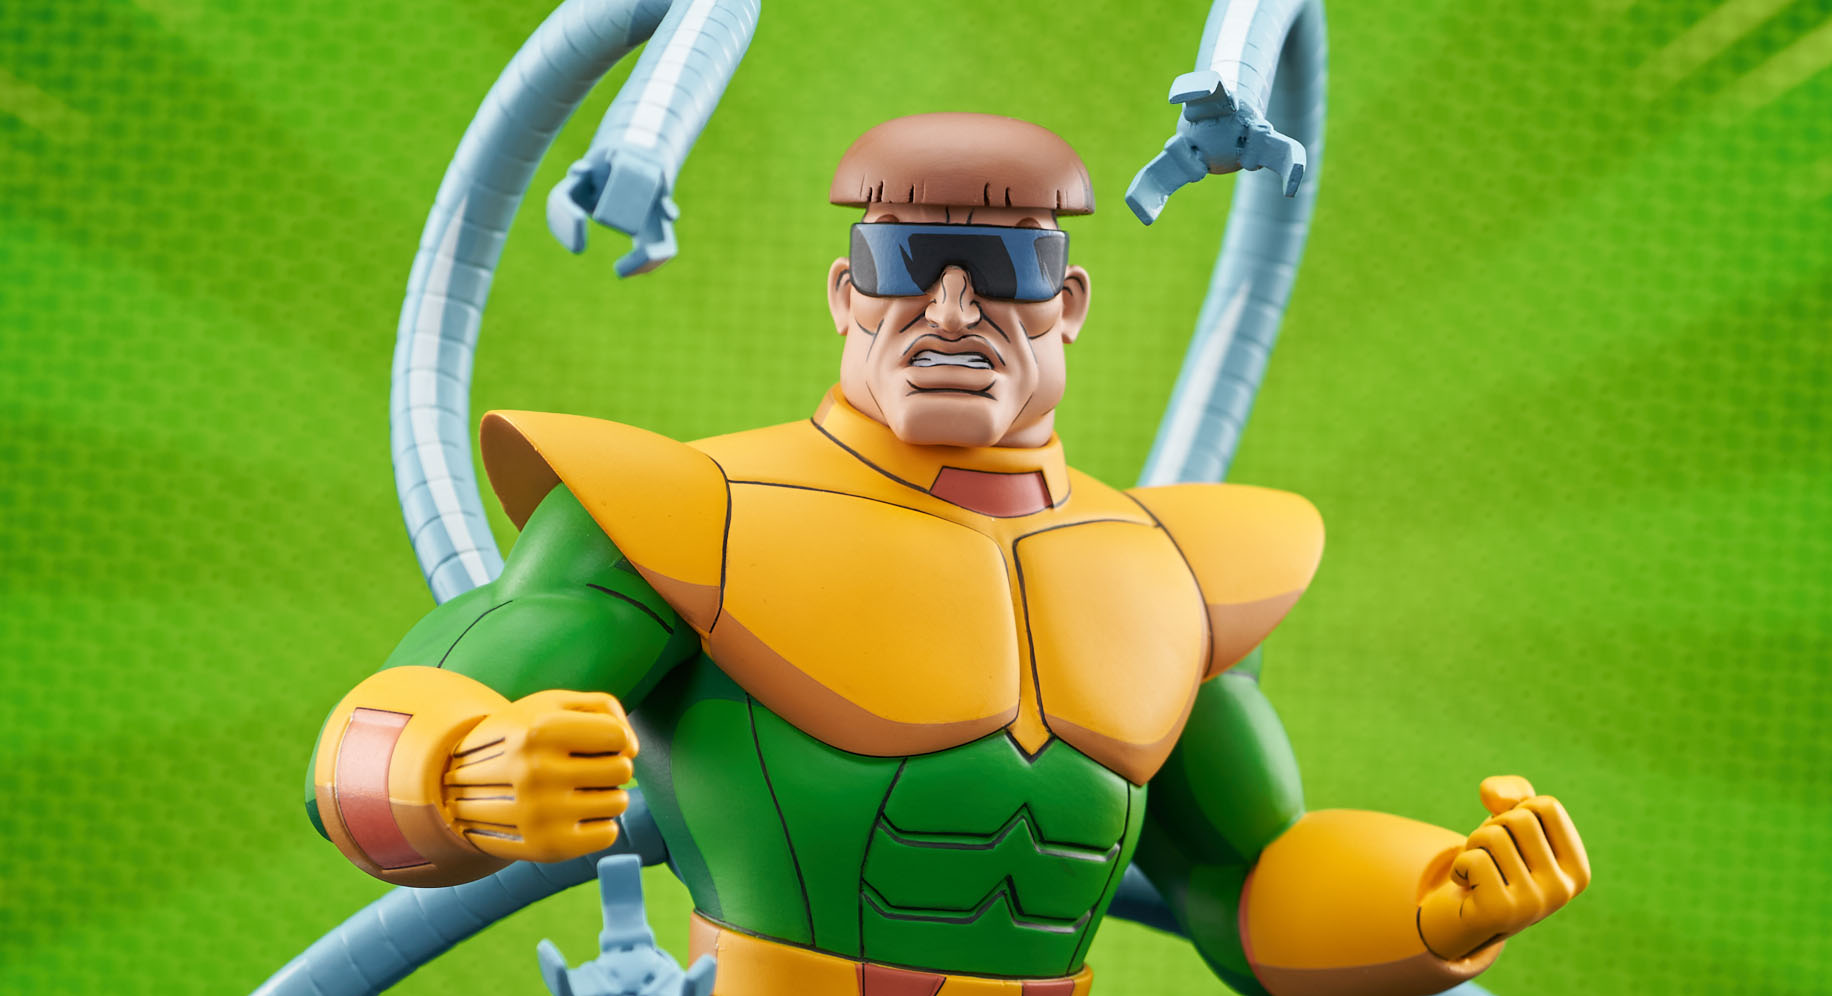 Marvel Spider-Man Animated Doctor Octopus Bust